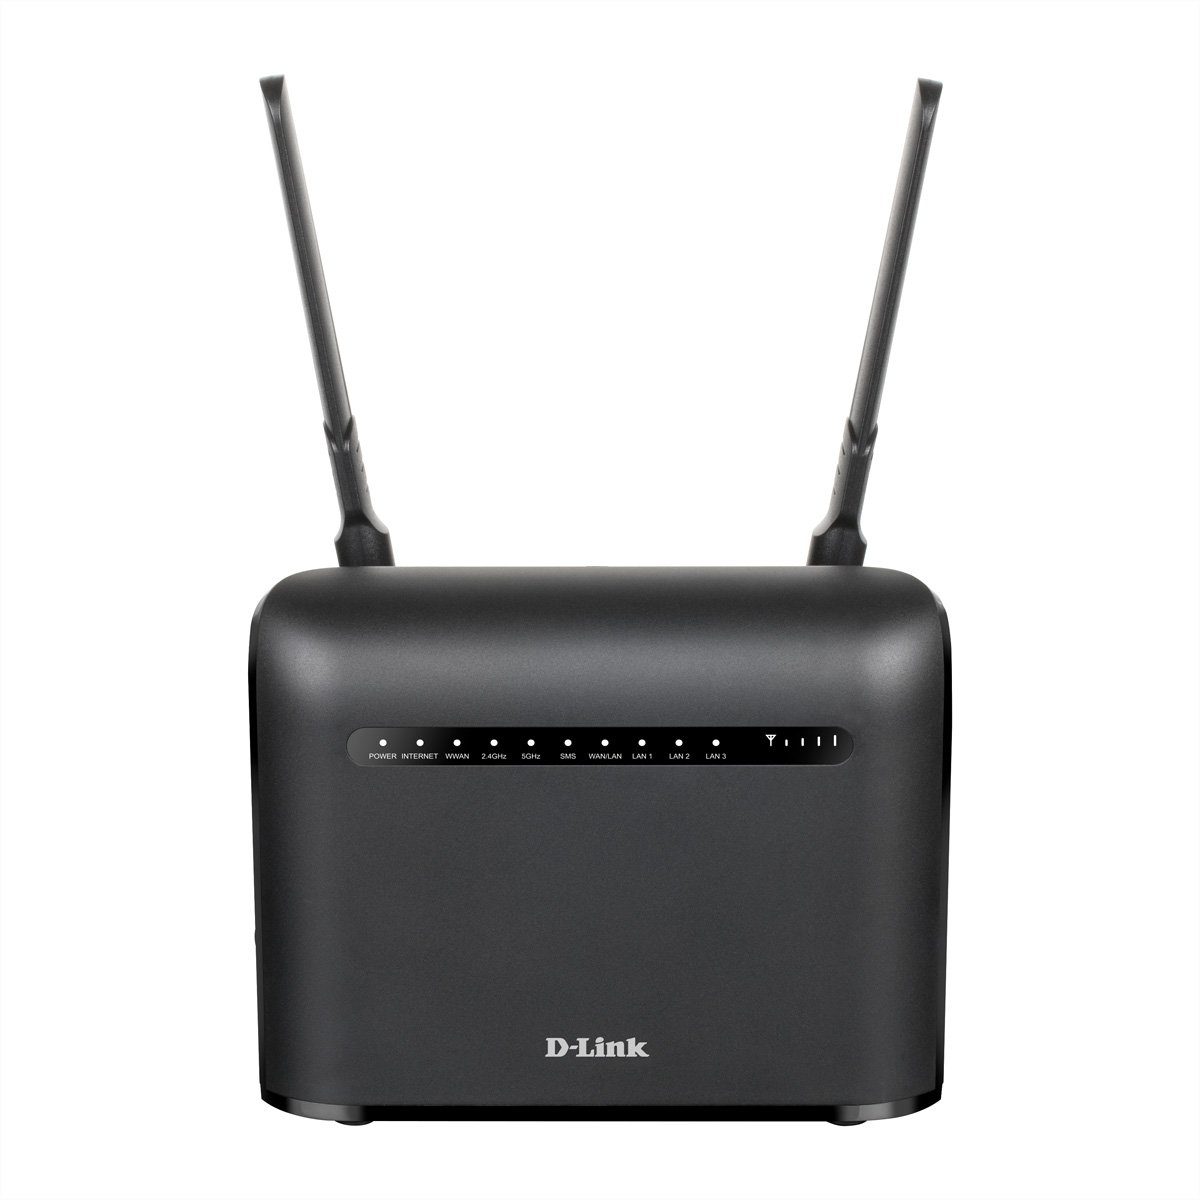 D-Link DWR-953V2 Wireless AC1200 4G LTE Cat4 Router WLAN-Router